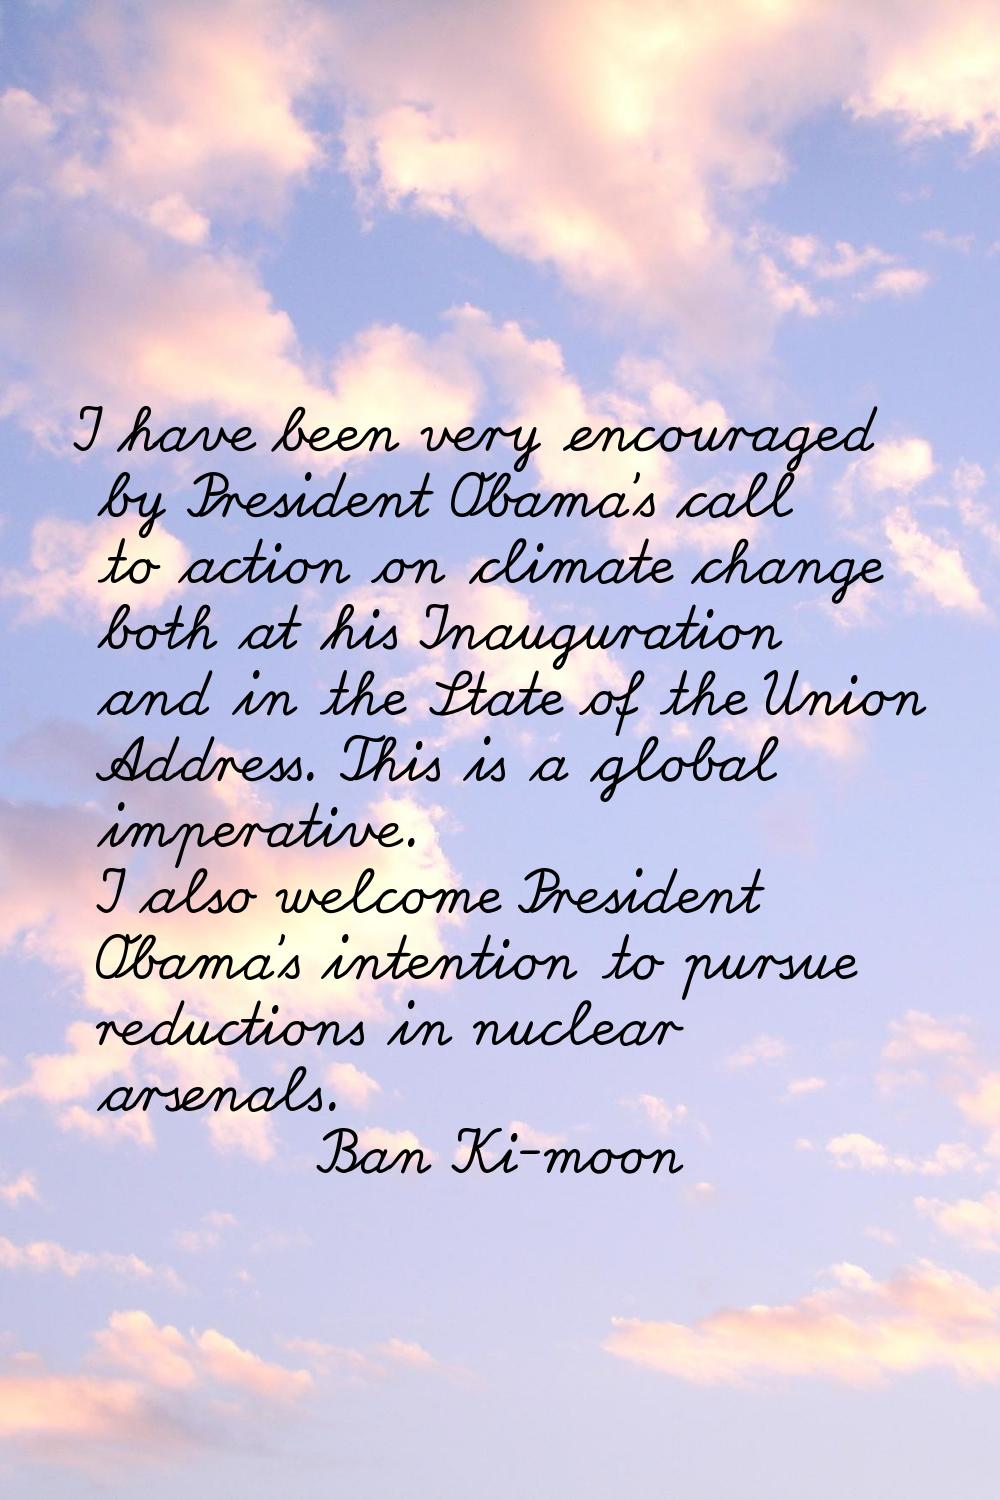 I have been very encouraged by President Obama's call to action on climate change both at his Inaug